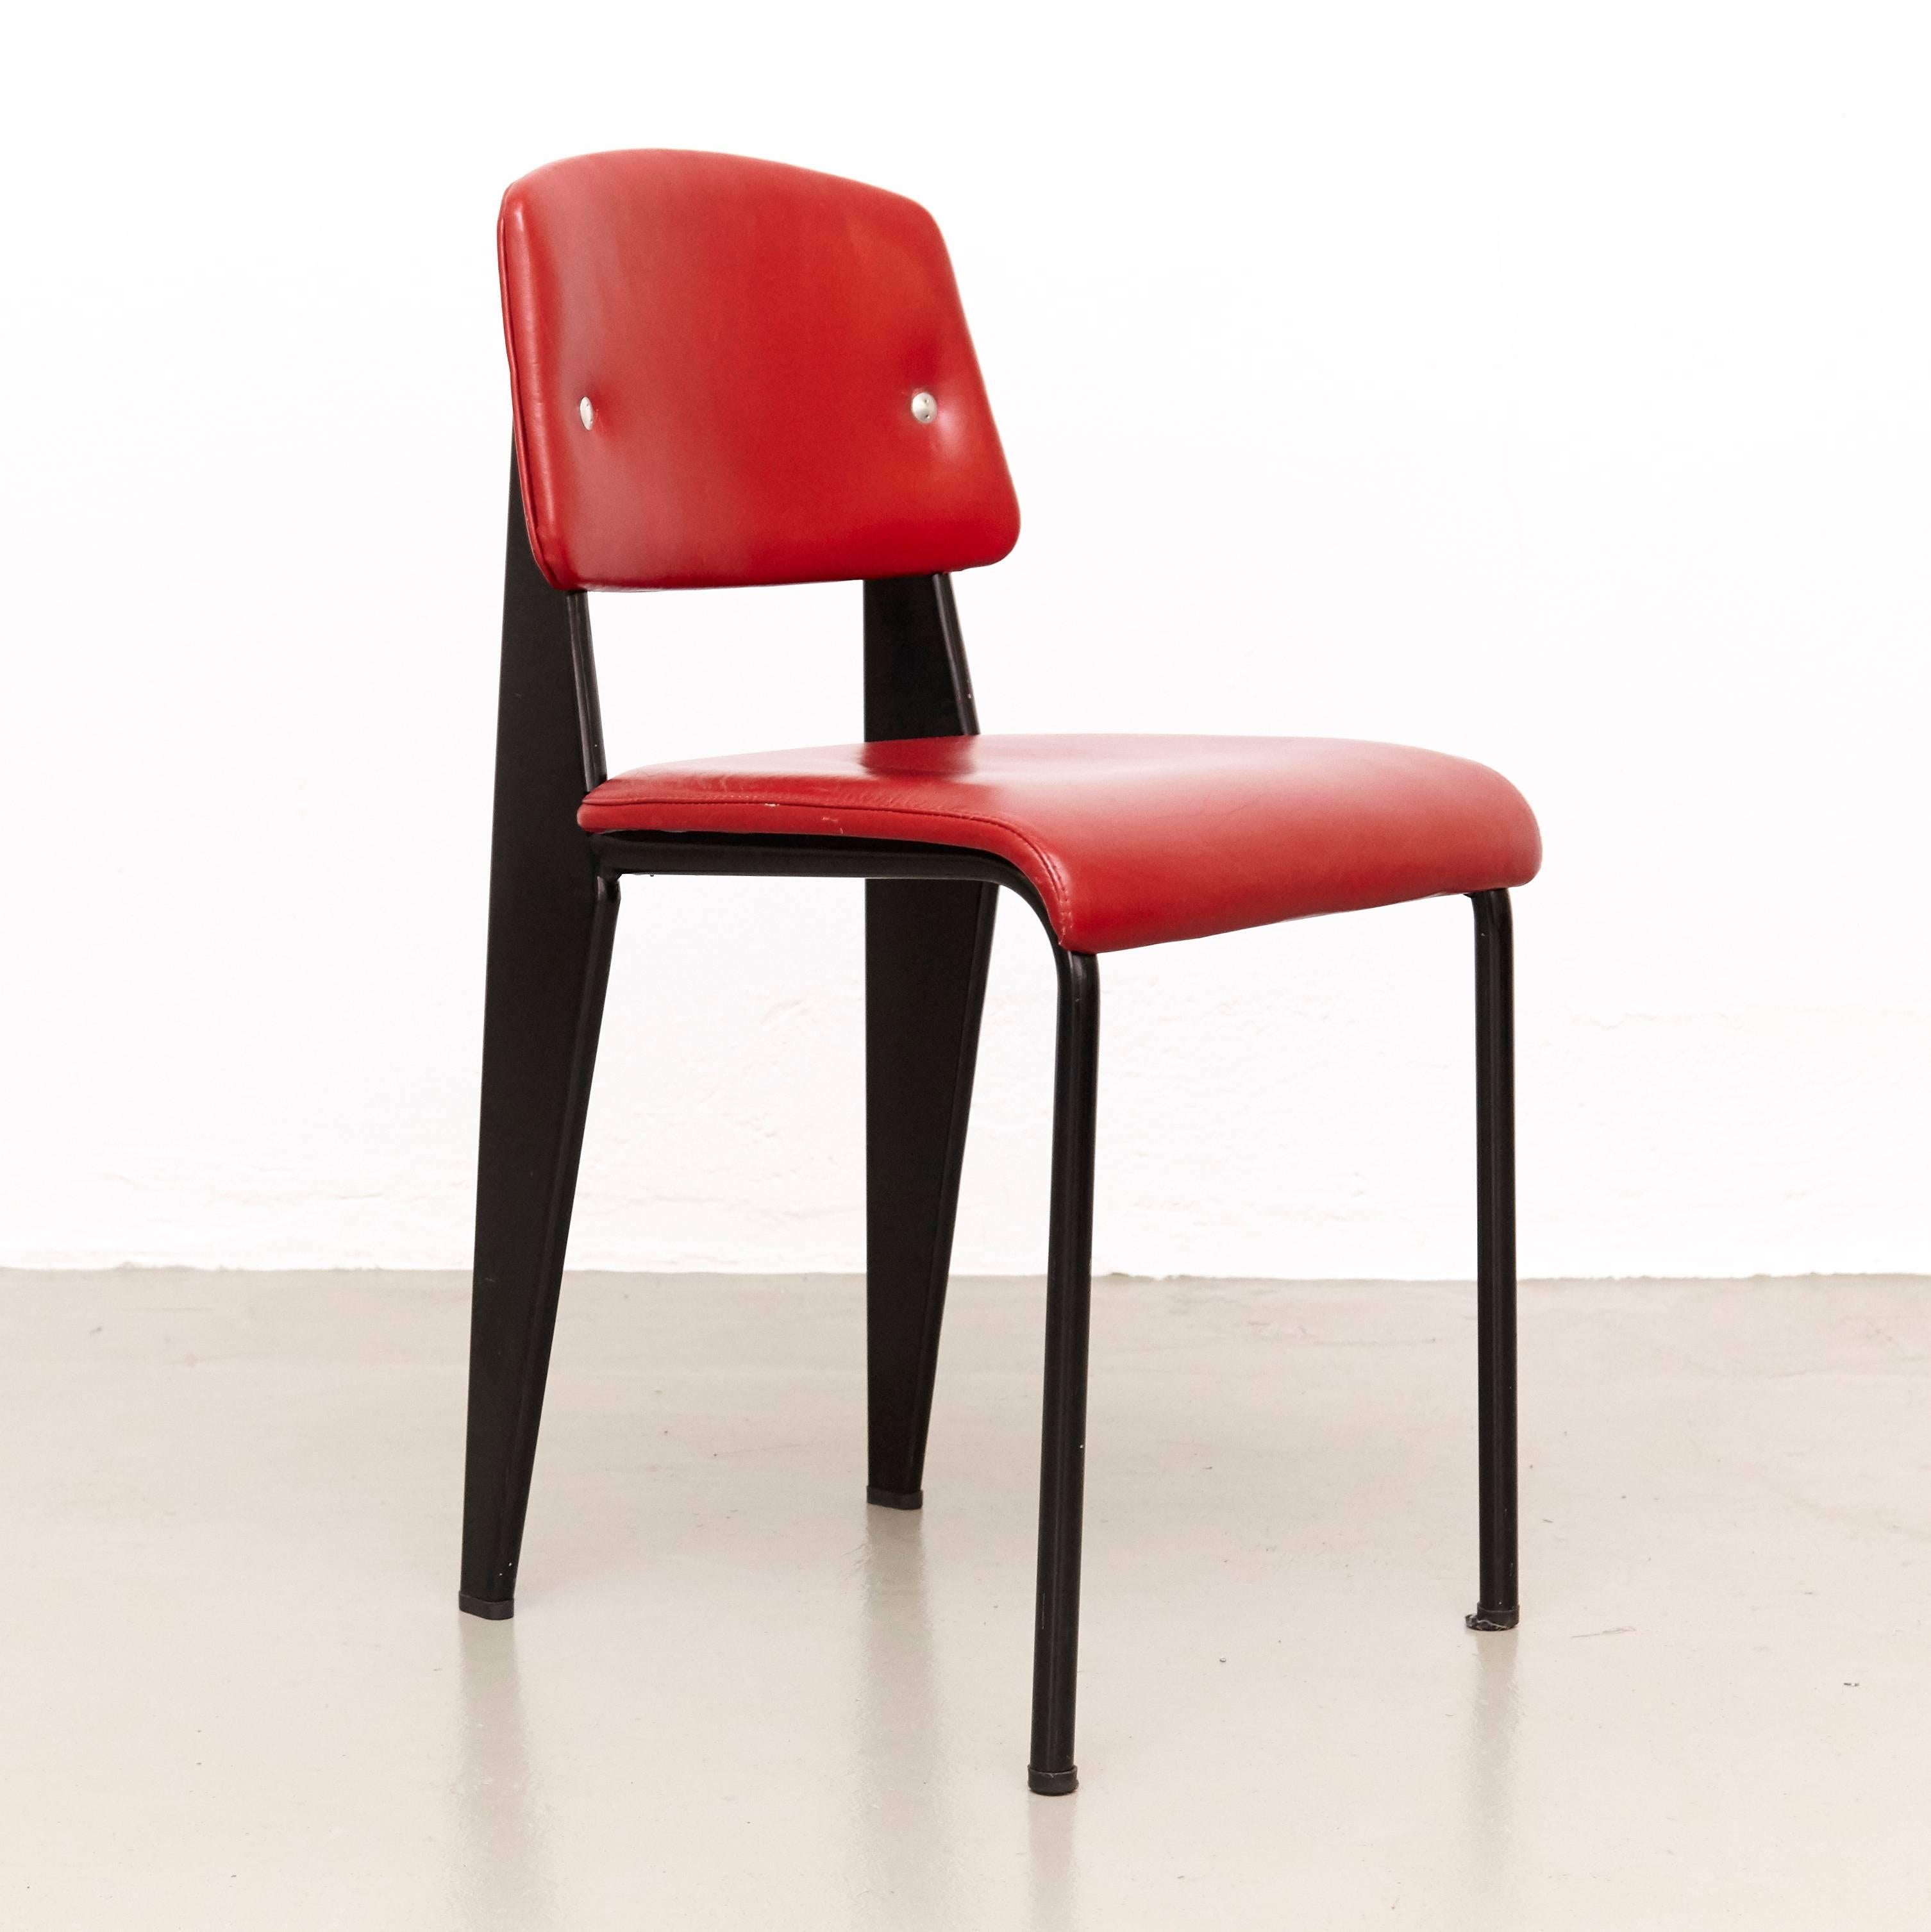 Standard chair designed by Jean Prouvé.
Manufactured by Ateliers Prouve, France, circa 1950.
Model 305 in wood, upholstered in red many years ago by the previous owner.

The standard chair was commissioned for the social security meeting rooms